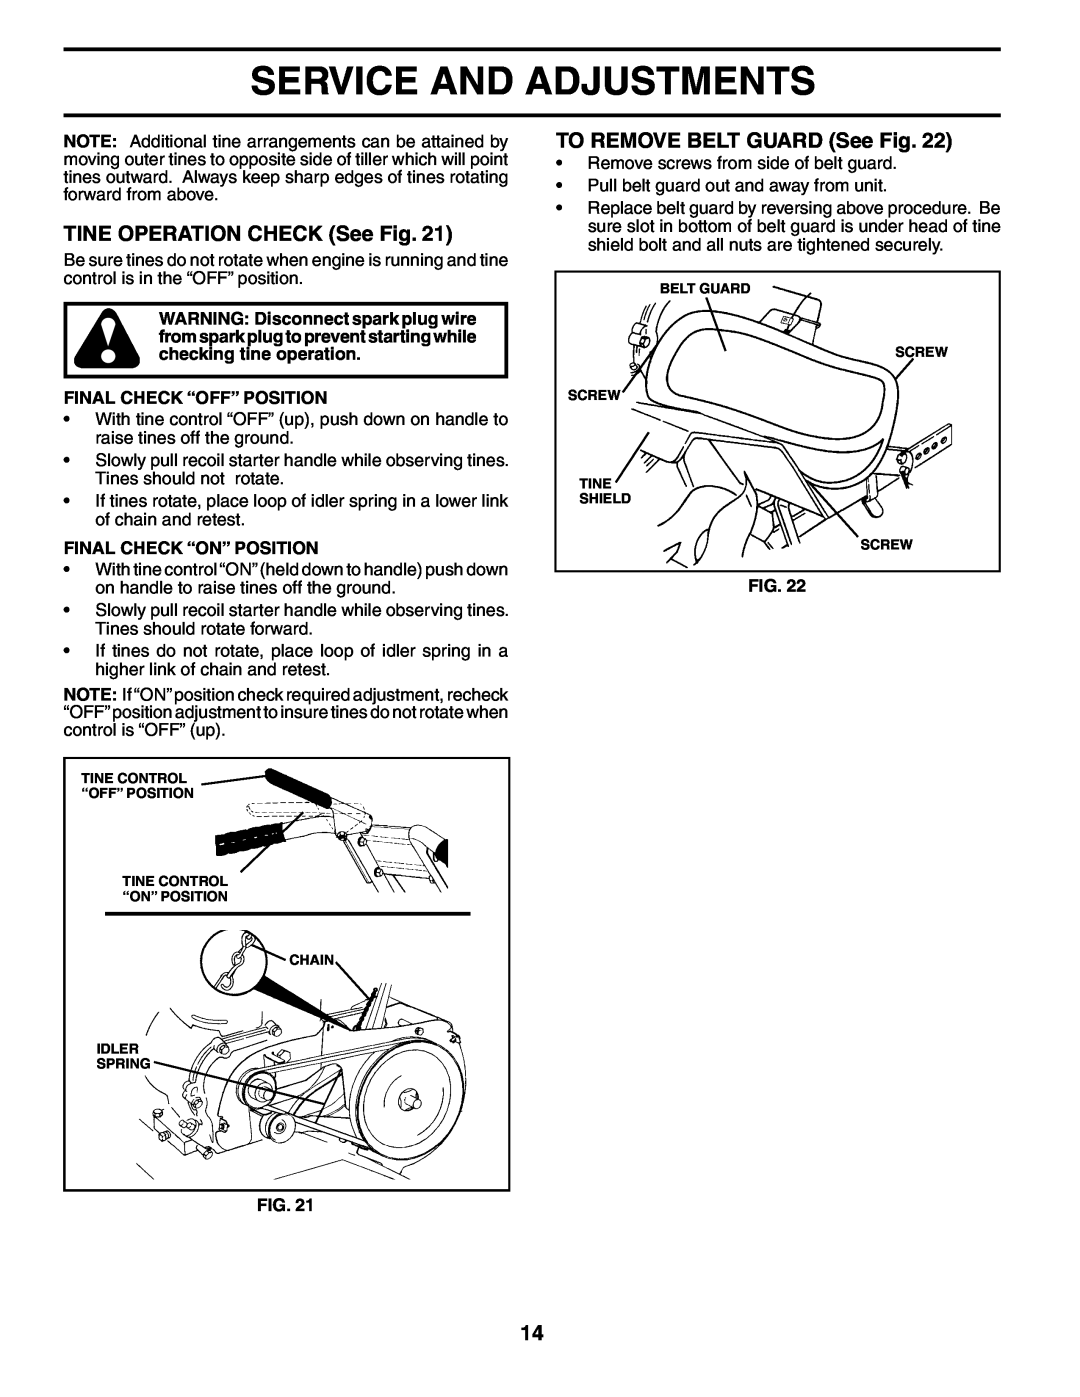 Electrolux FN620K owner manual TINE OPERATION CHECK See Fig, TO REMOVE BELT GUARD See Fig, Service And Adjustments 